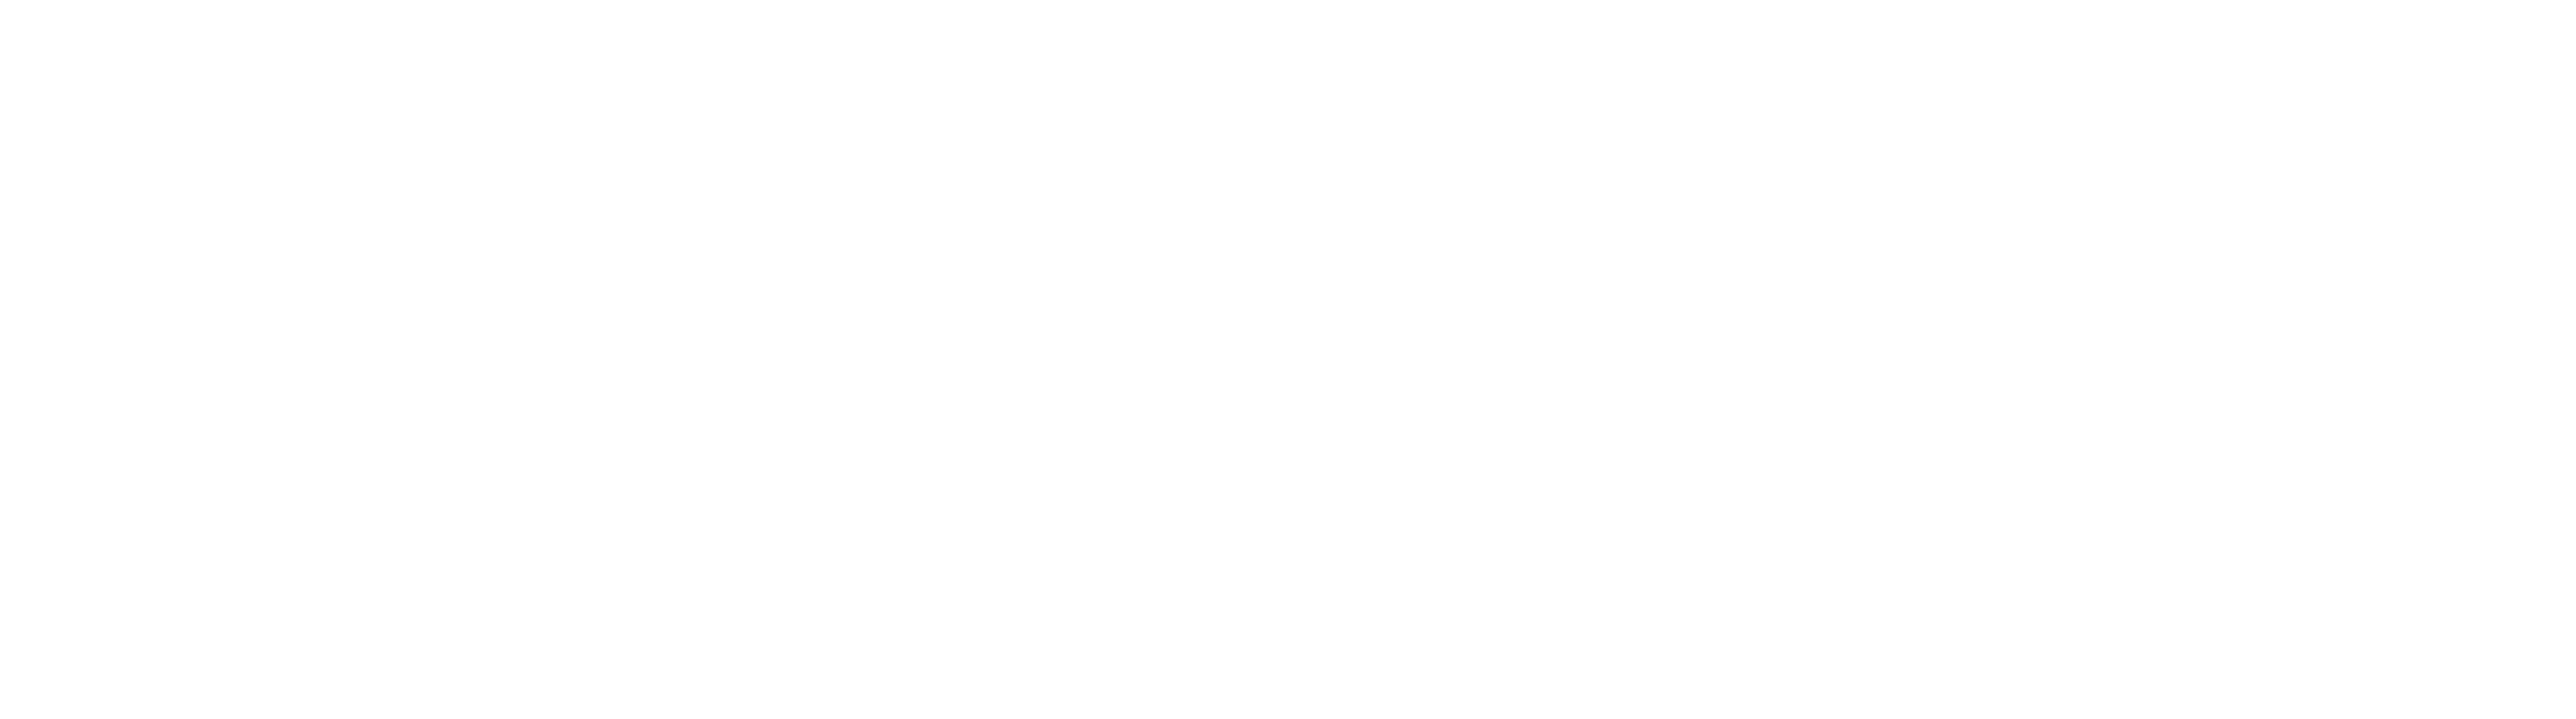 https://clackamasartsalliance.org/wp-content/uploads/2022/10/We-Keep-arts-and-culture.-WHITEai-01.png